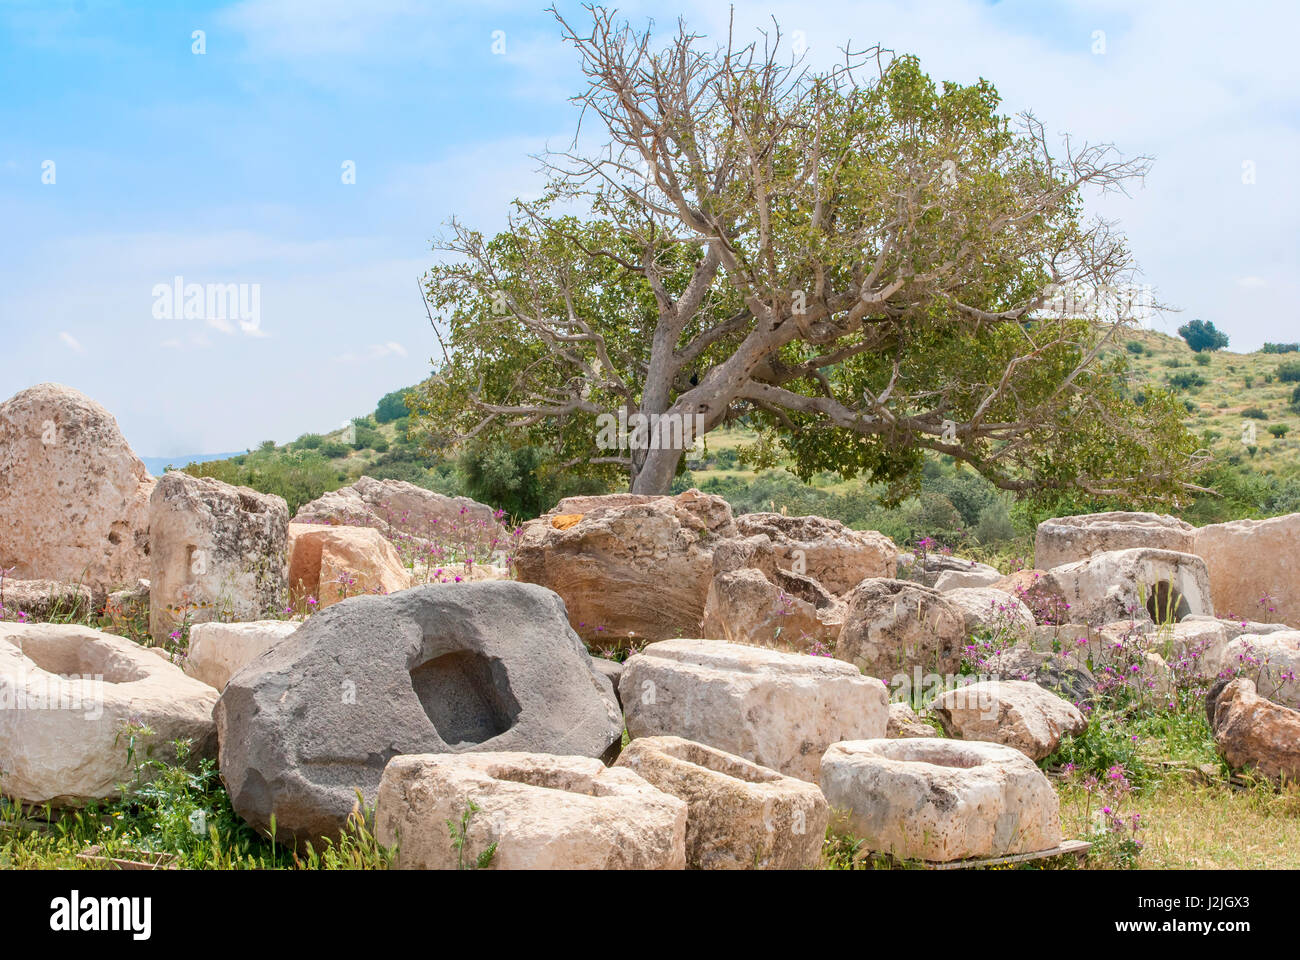 Archeological ruins ancient buildings in Beit Guvrin national Park, Israel. Stock Photo